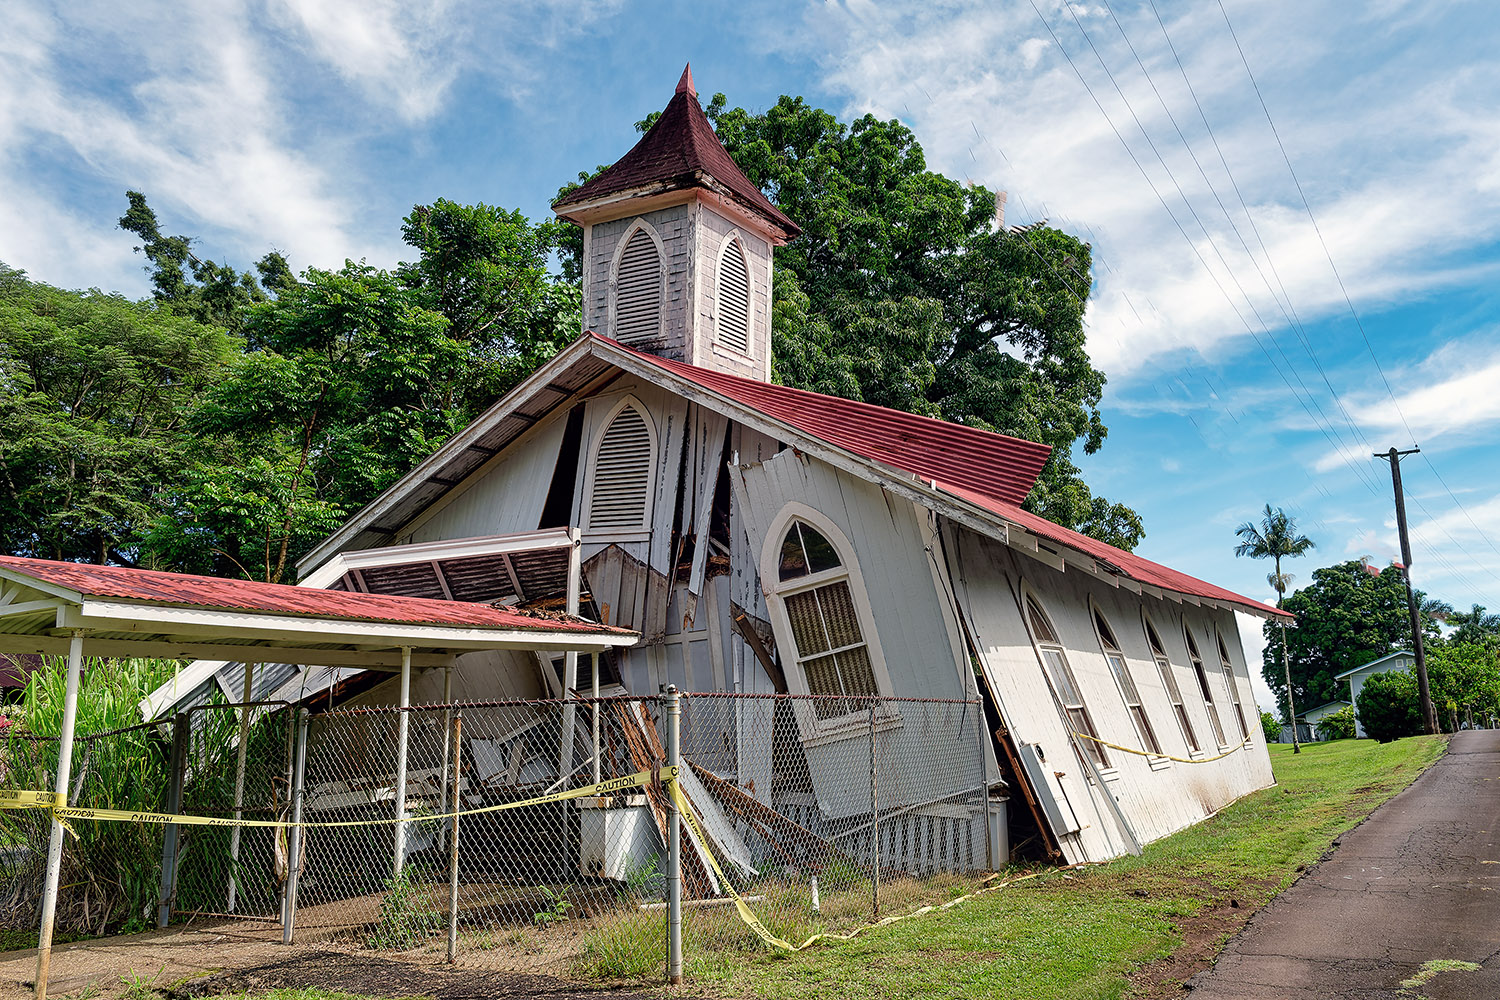 It's hard to imagine what might have happened to this church!